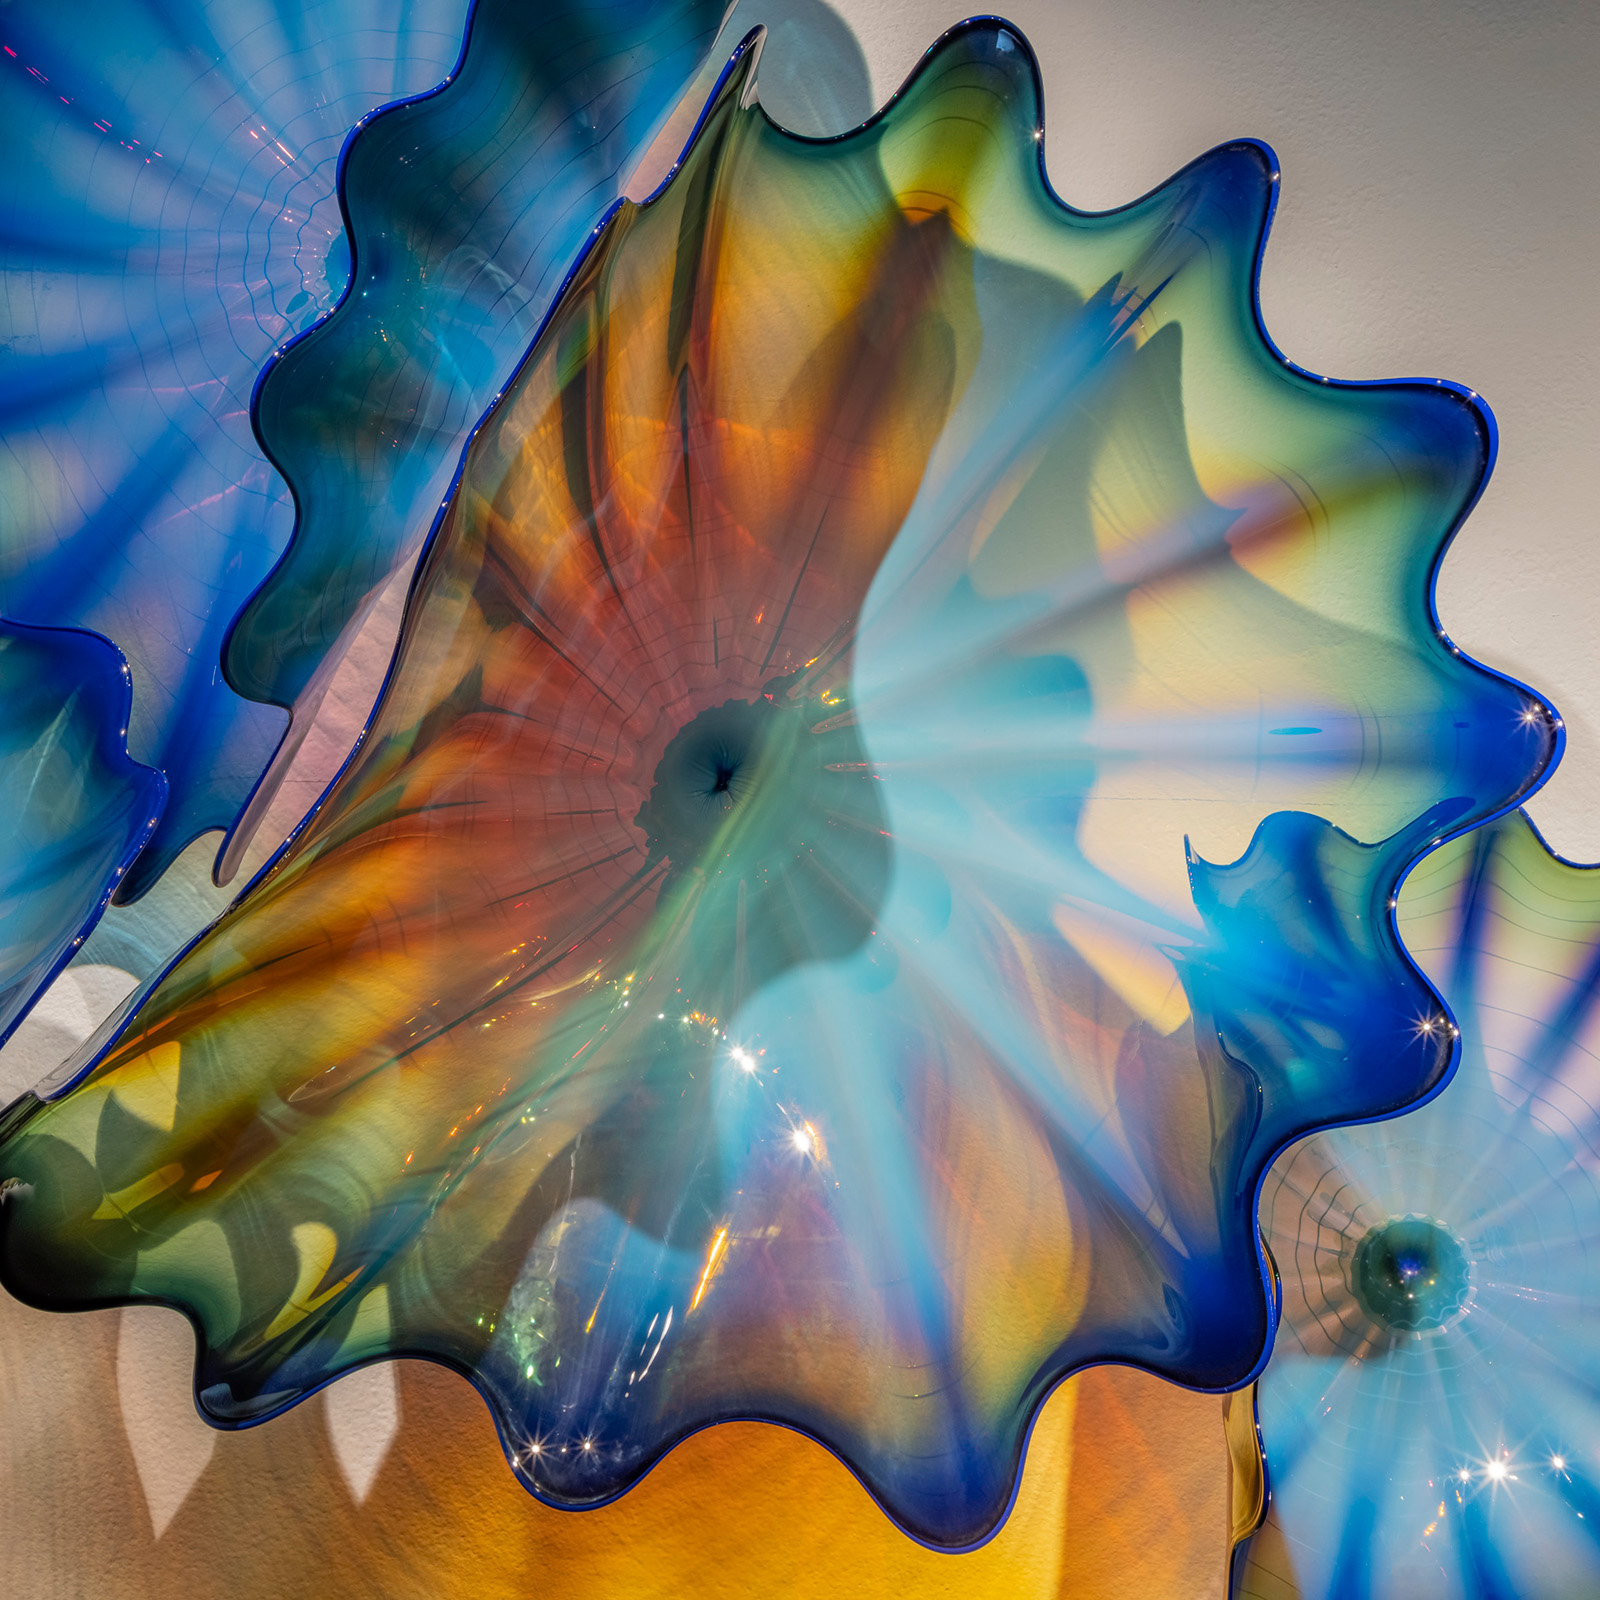 Azurite Copper Persian Wall (detail), 2019 by Dale Chihuly